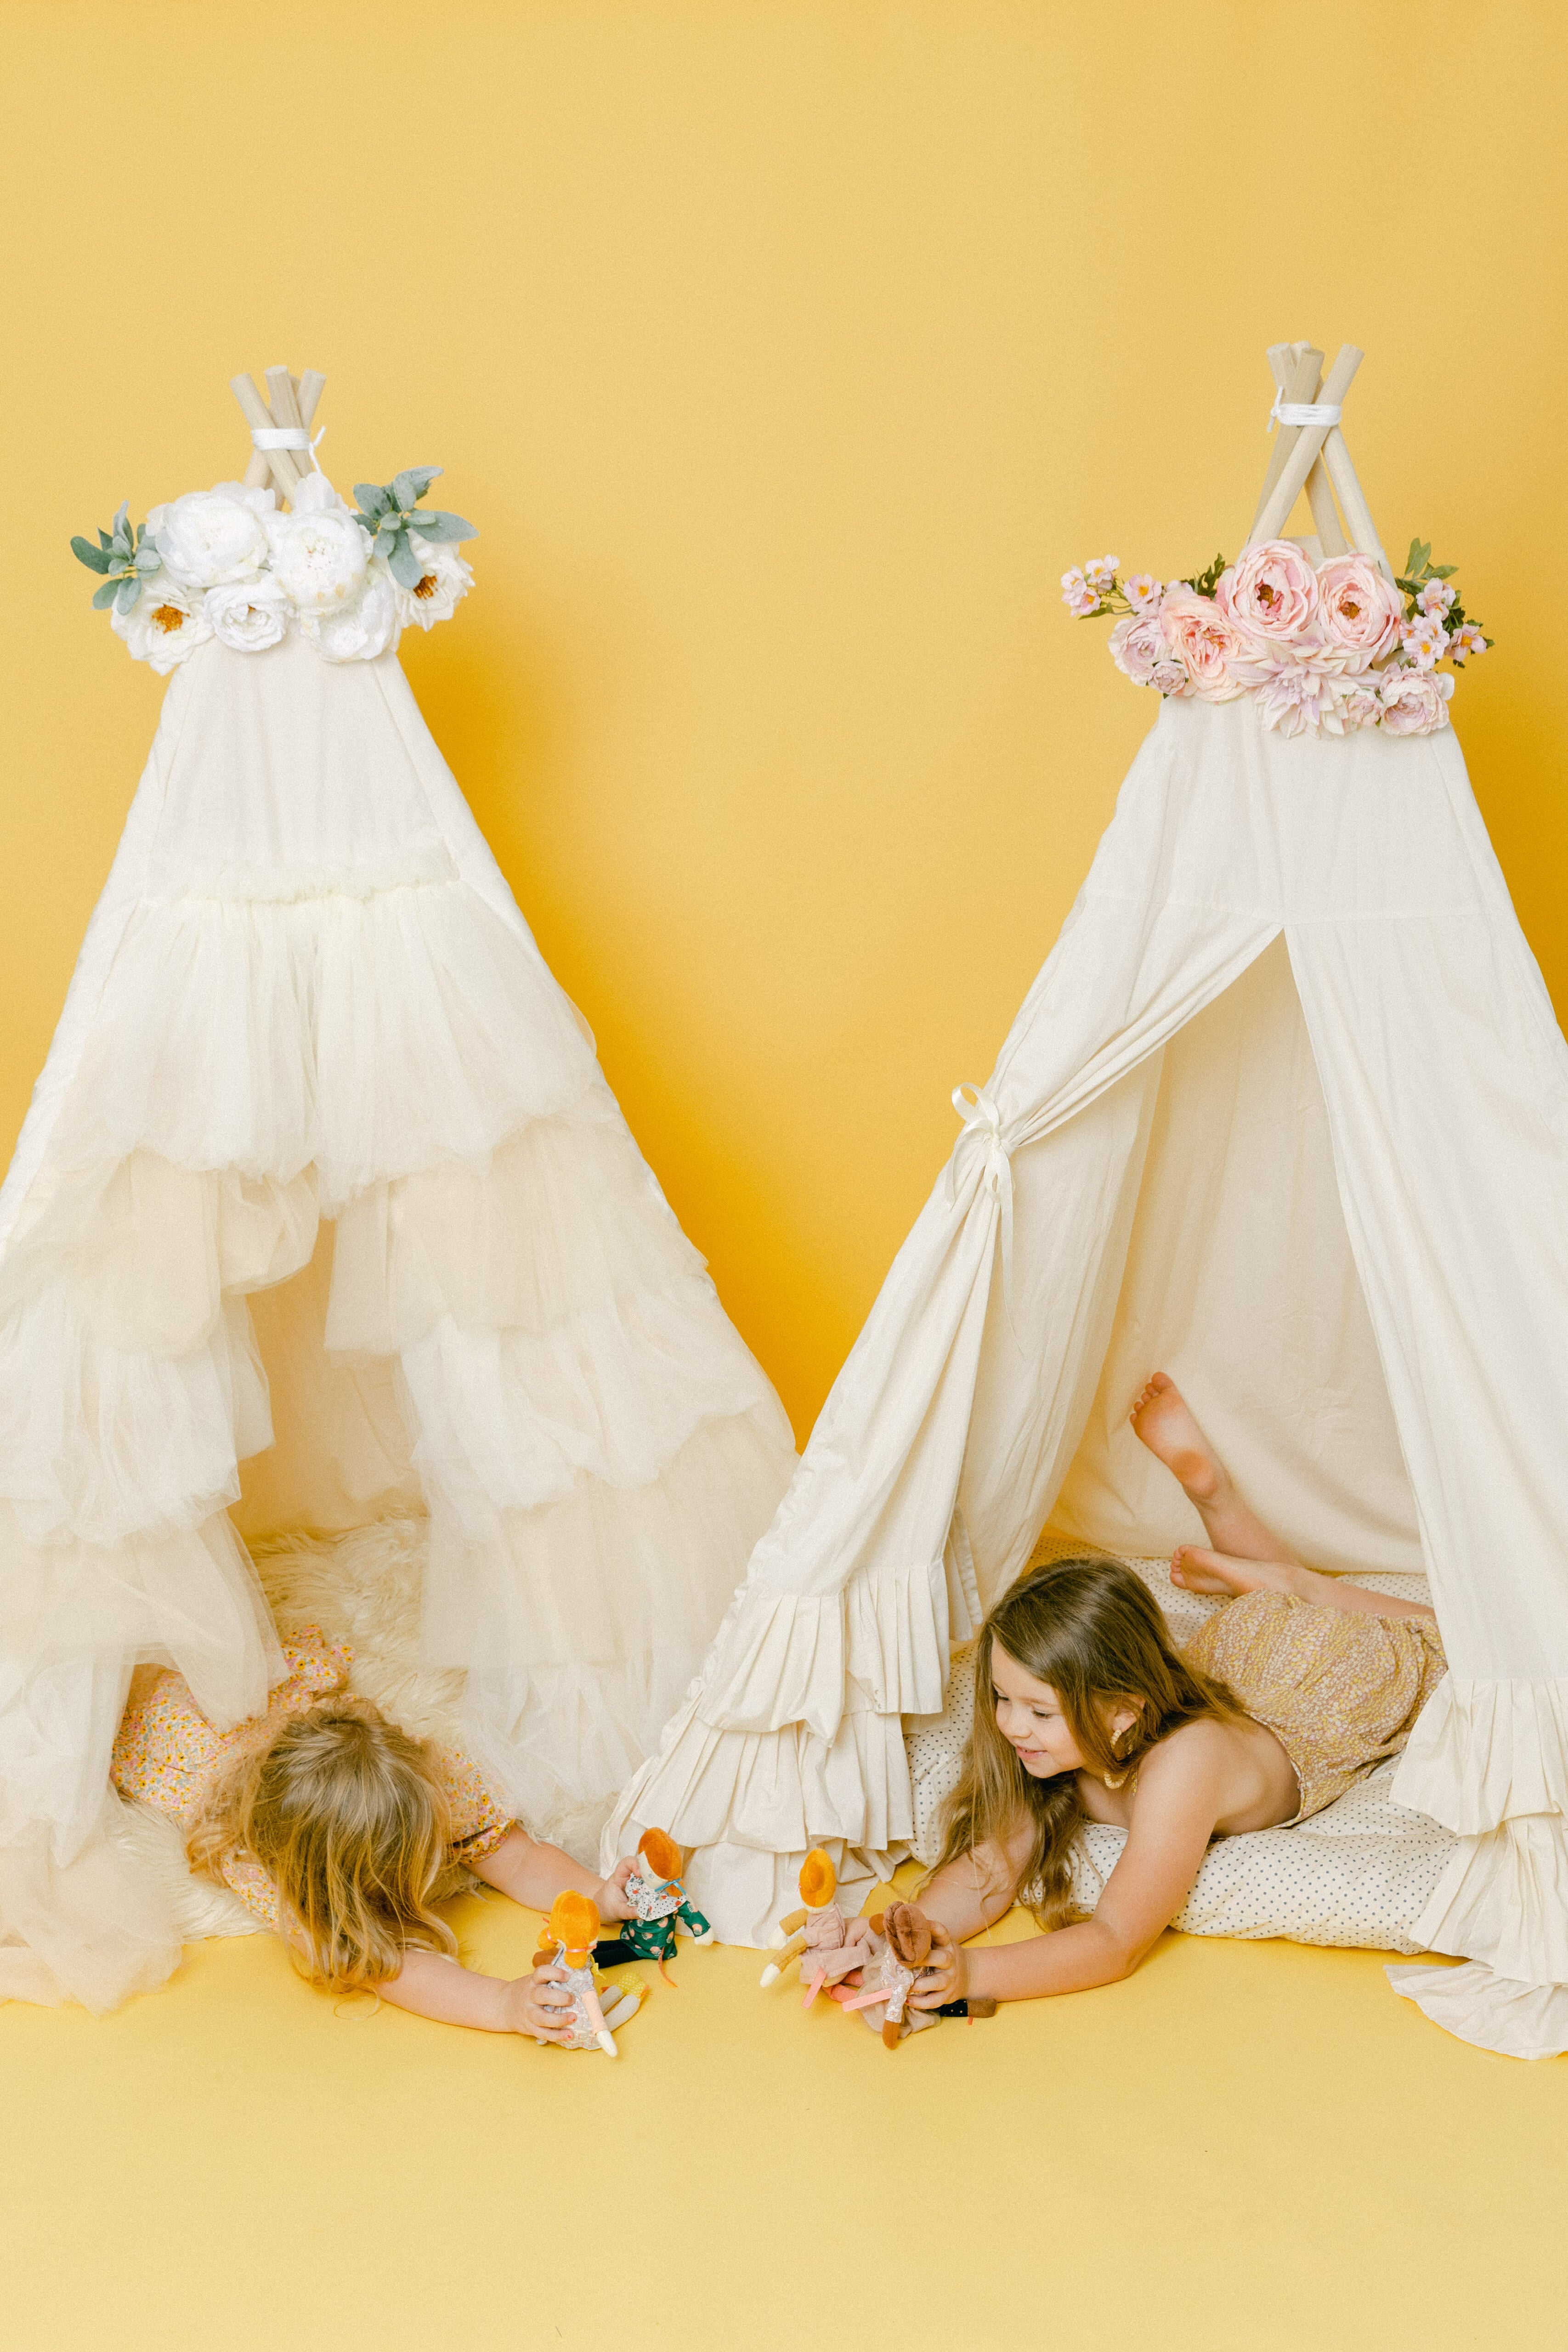 The Ivory Tulle Ruffle Play Tent